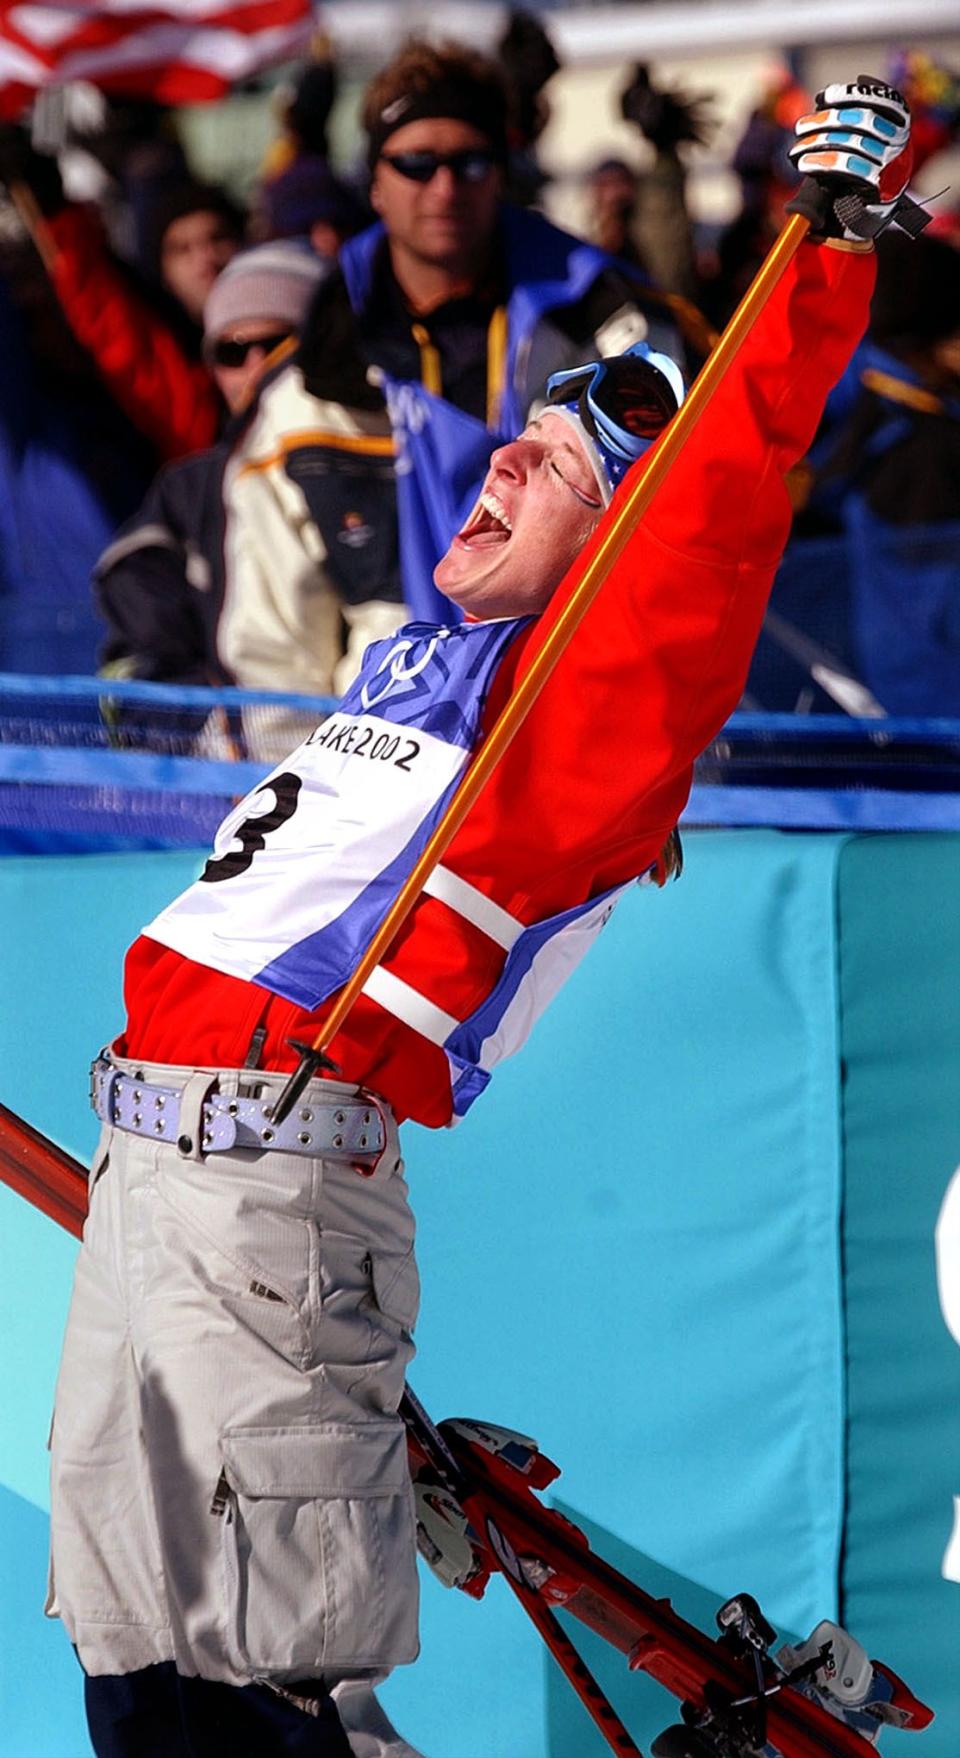 USA’s Shannon Bahrke celebrates after her final women’s mogul run at Deer Valley during the Salt Lake Winter Games on Feb. 9, 2002. Bahrke claimed the silver medal. | Laura Seitz, Deseret News